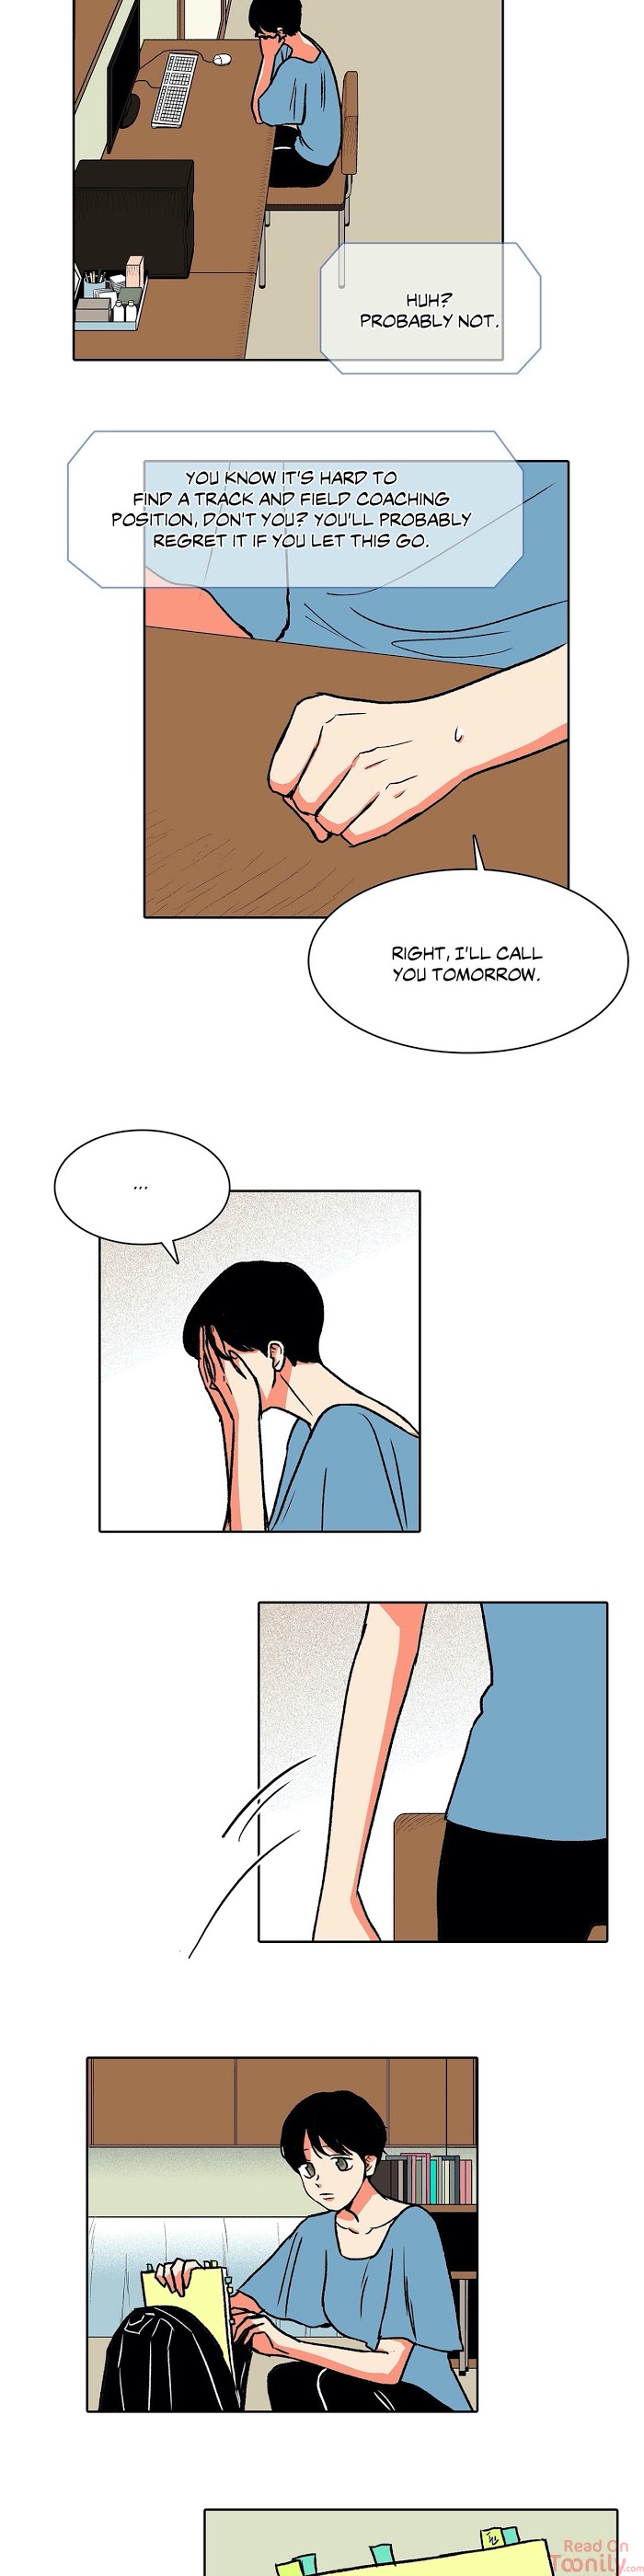 Be my guest manhwa